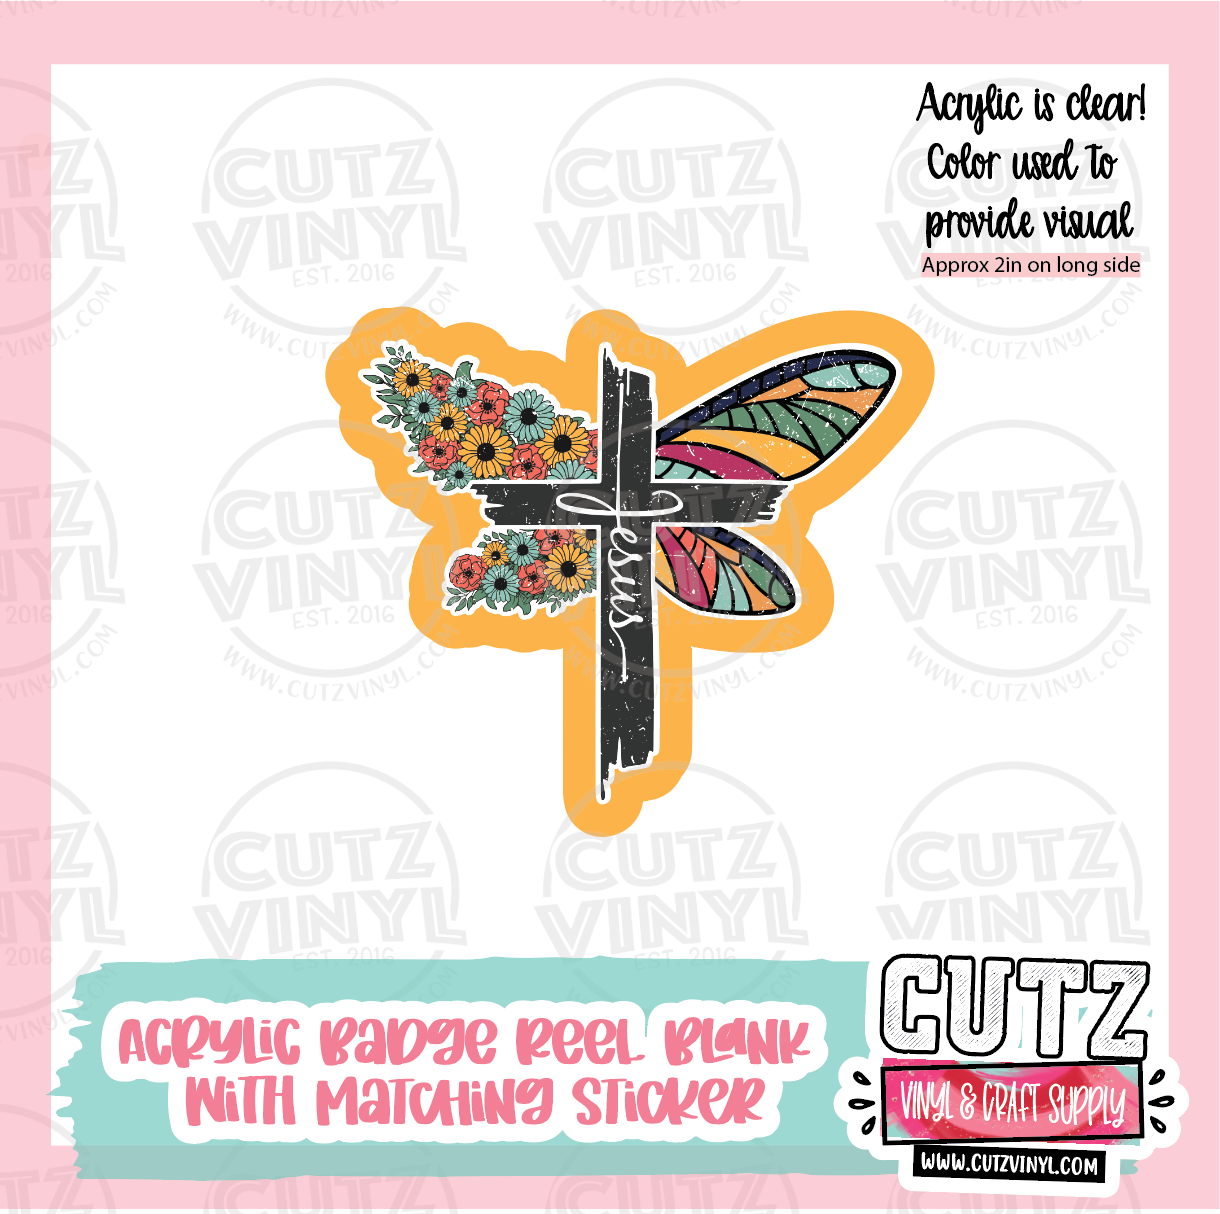 Jesus Dragon Fly - Acrylic Badge Reel Blank and Matching Sticker